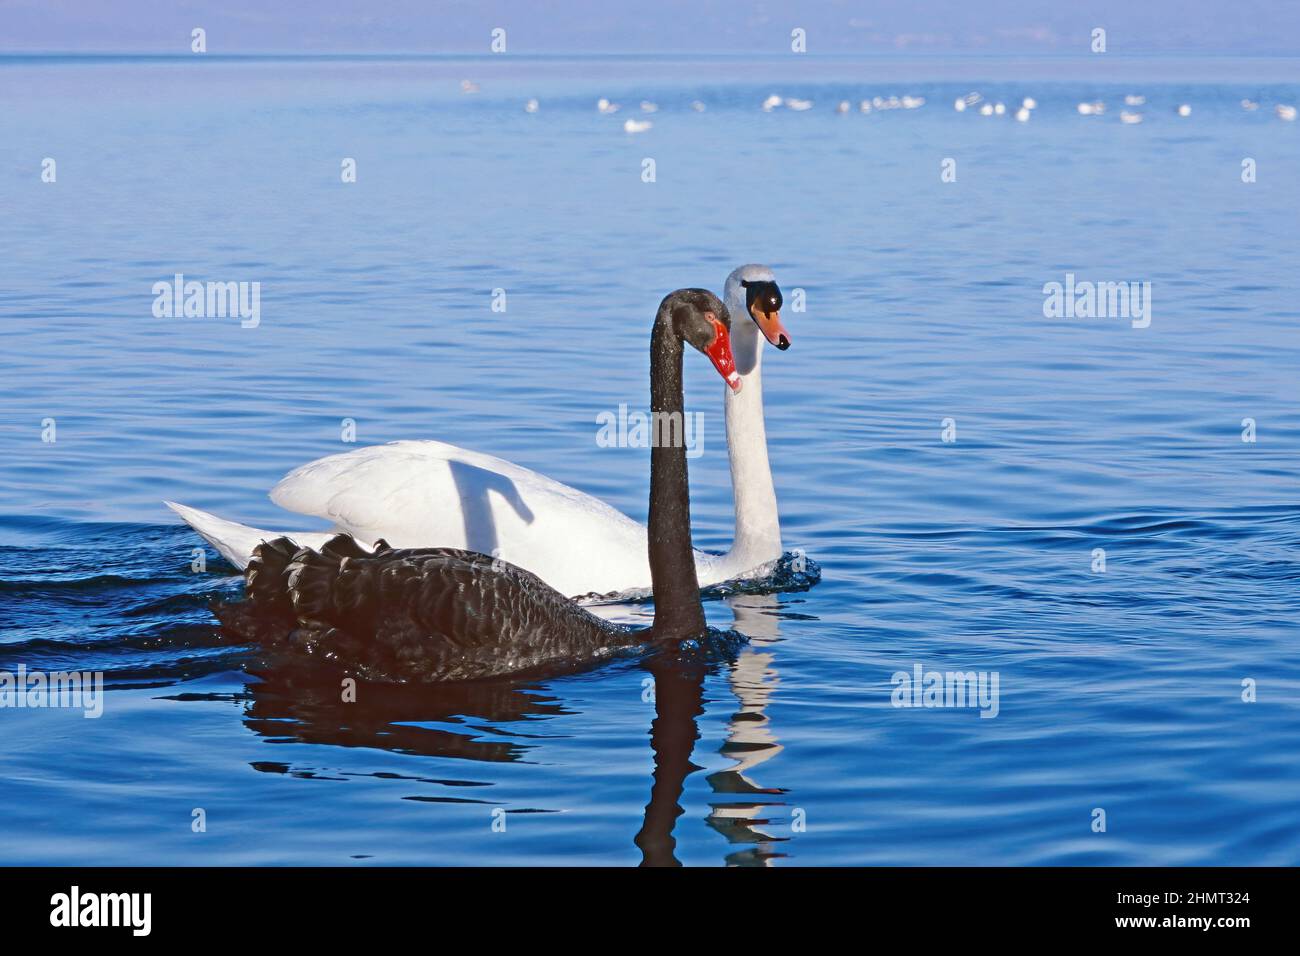 specimens of black swan and mute swan swims together in a lake Stock Photo